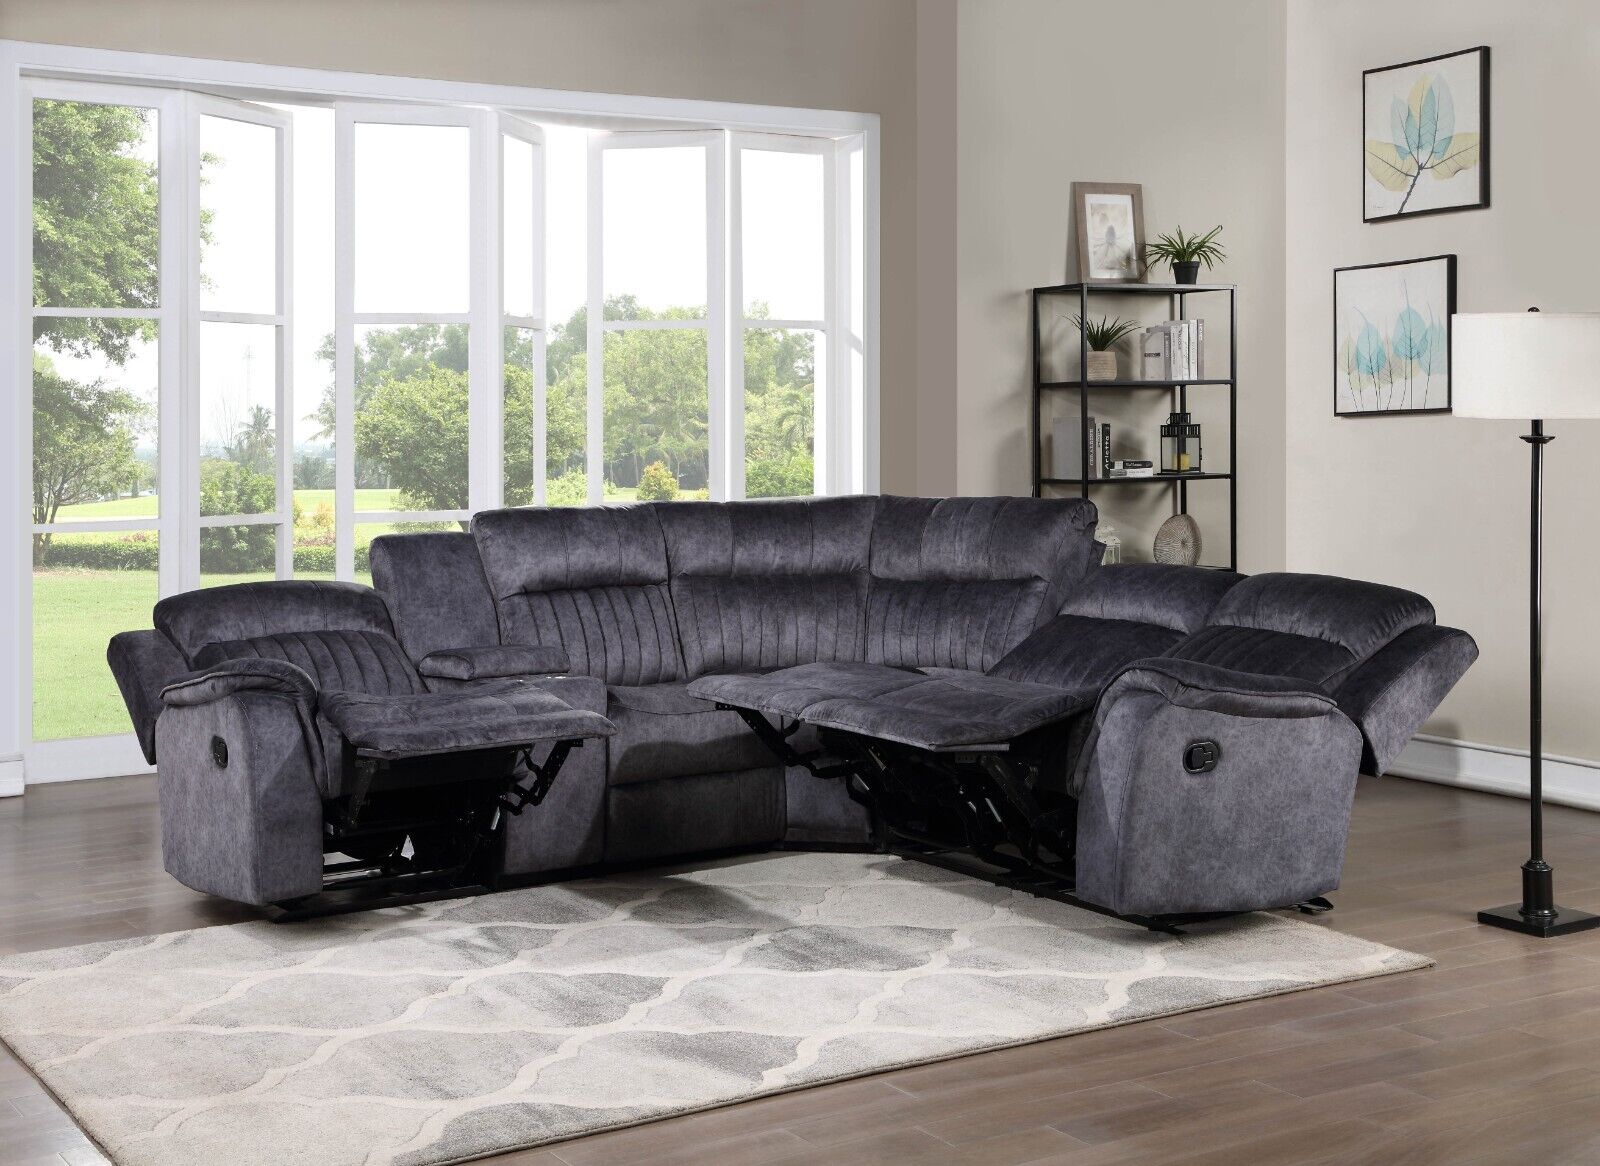 Esofastore Blue Gray Fabric Modular Sectional Sofa with Manual Recliner and Storage Console